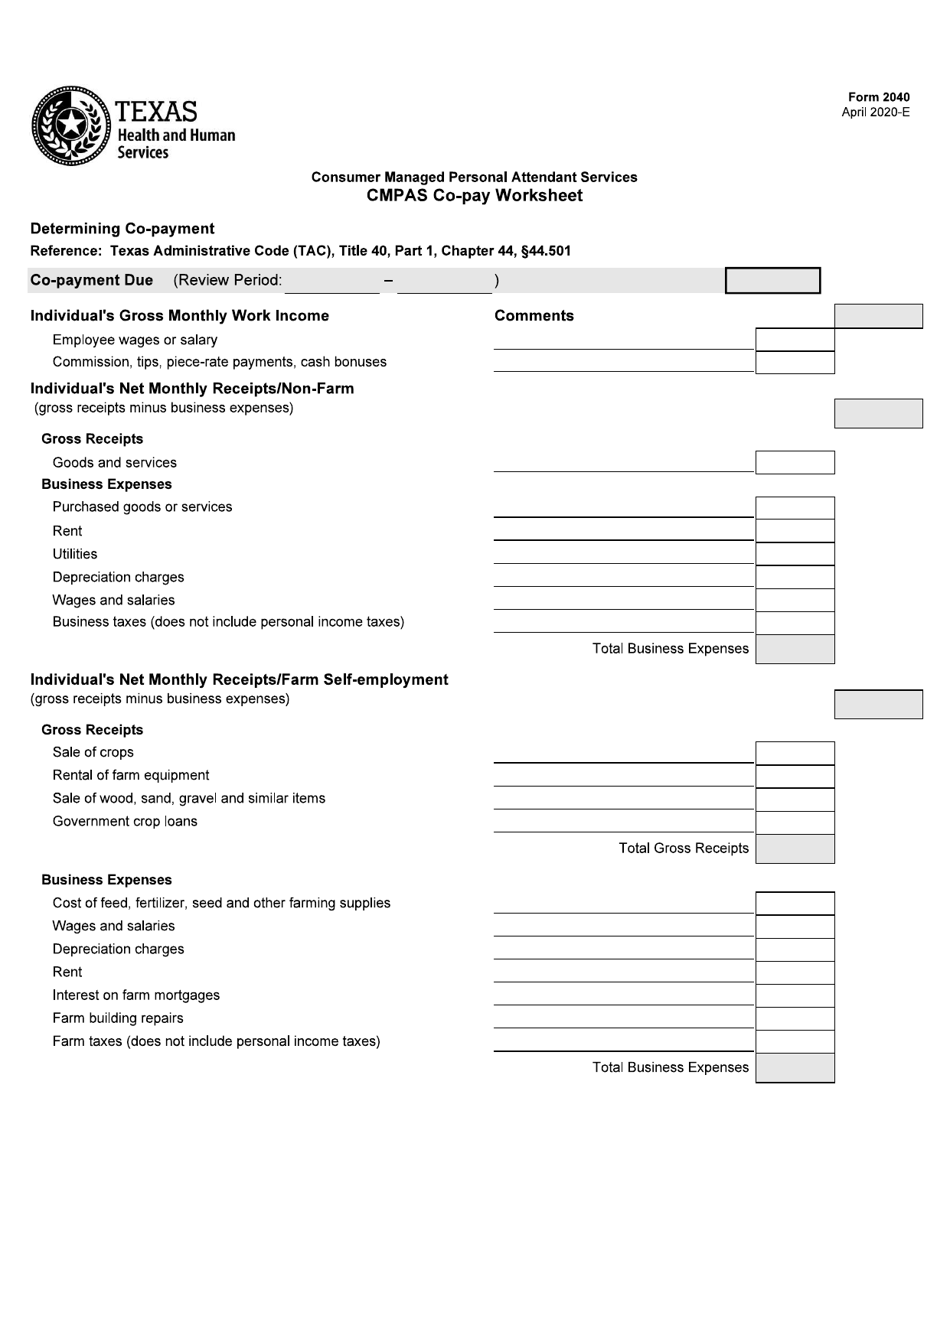 Form 2040 Consumer Managed Personal Attendant Services (Cmpas) Co-pay Worksheet - Texas, Page 1